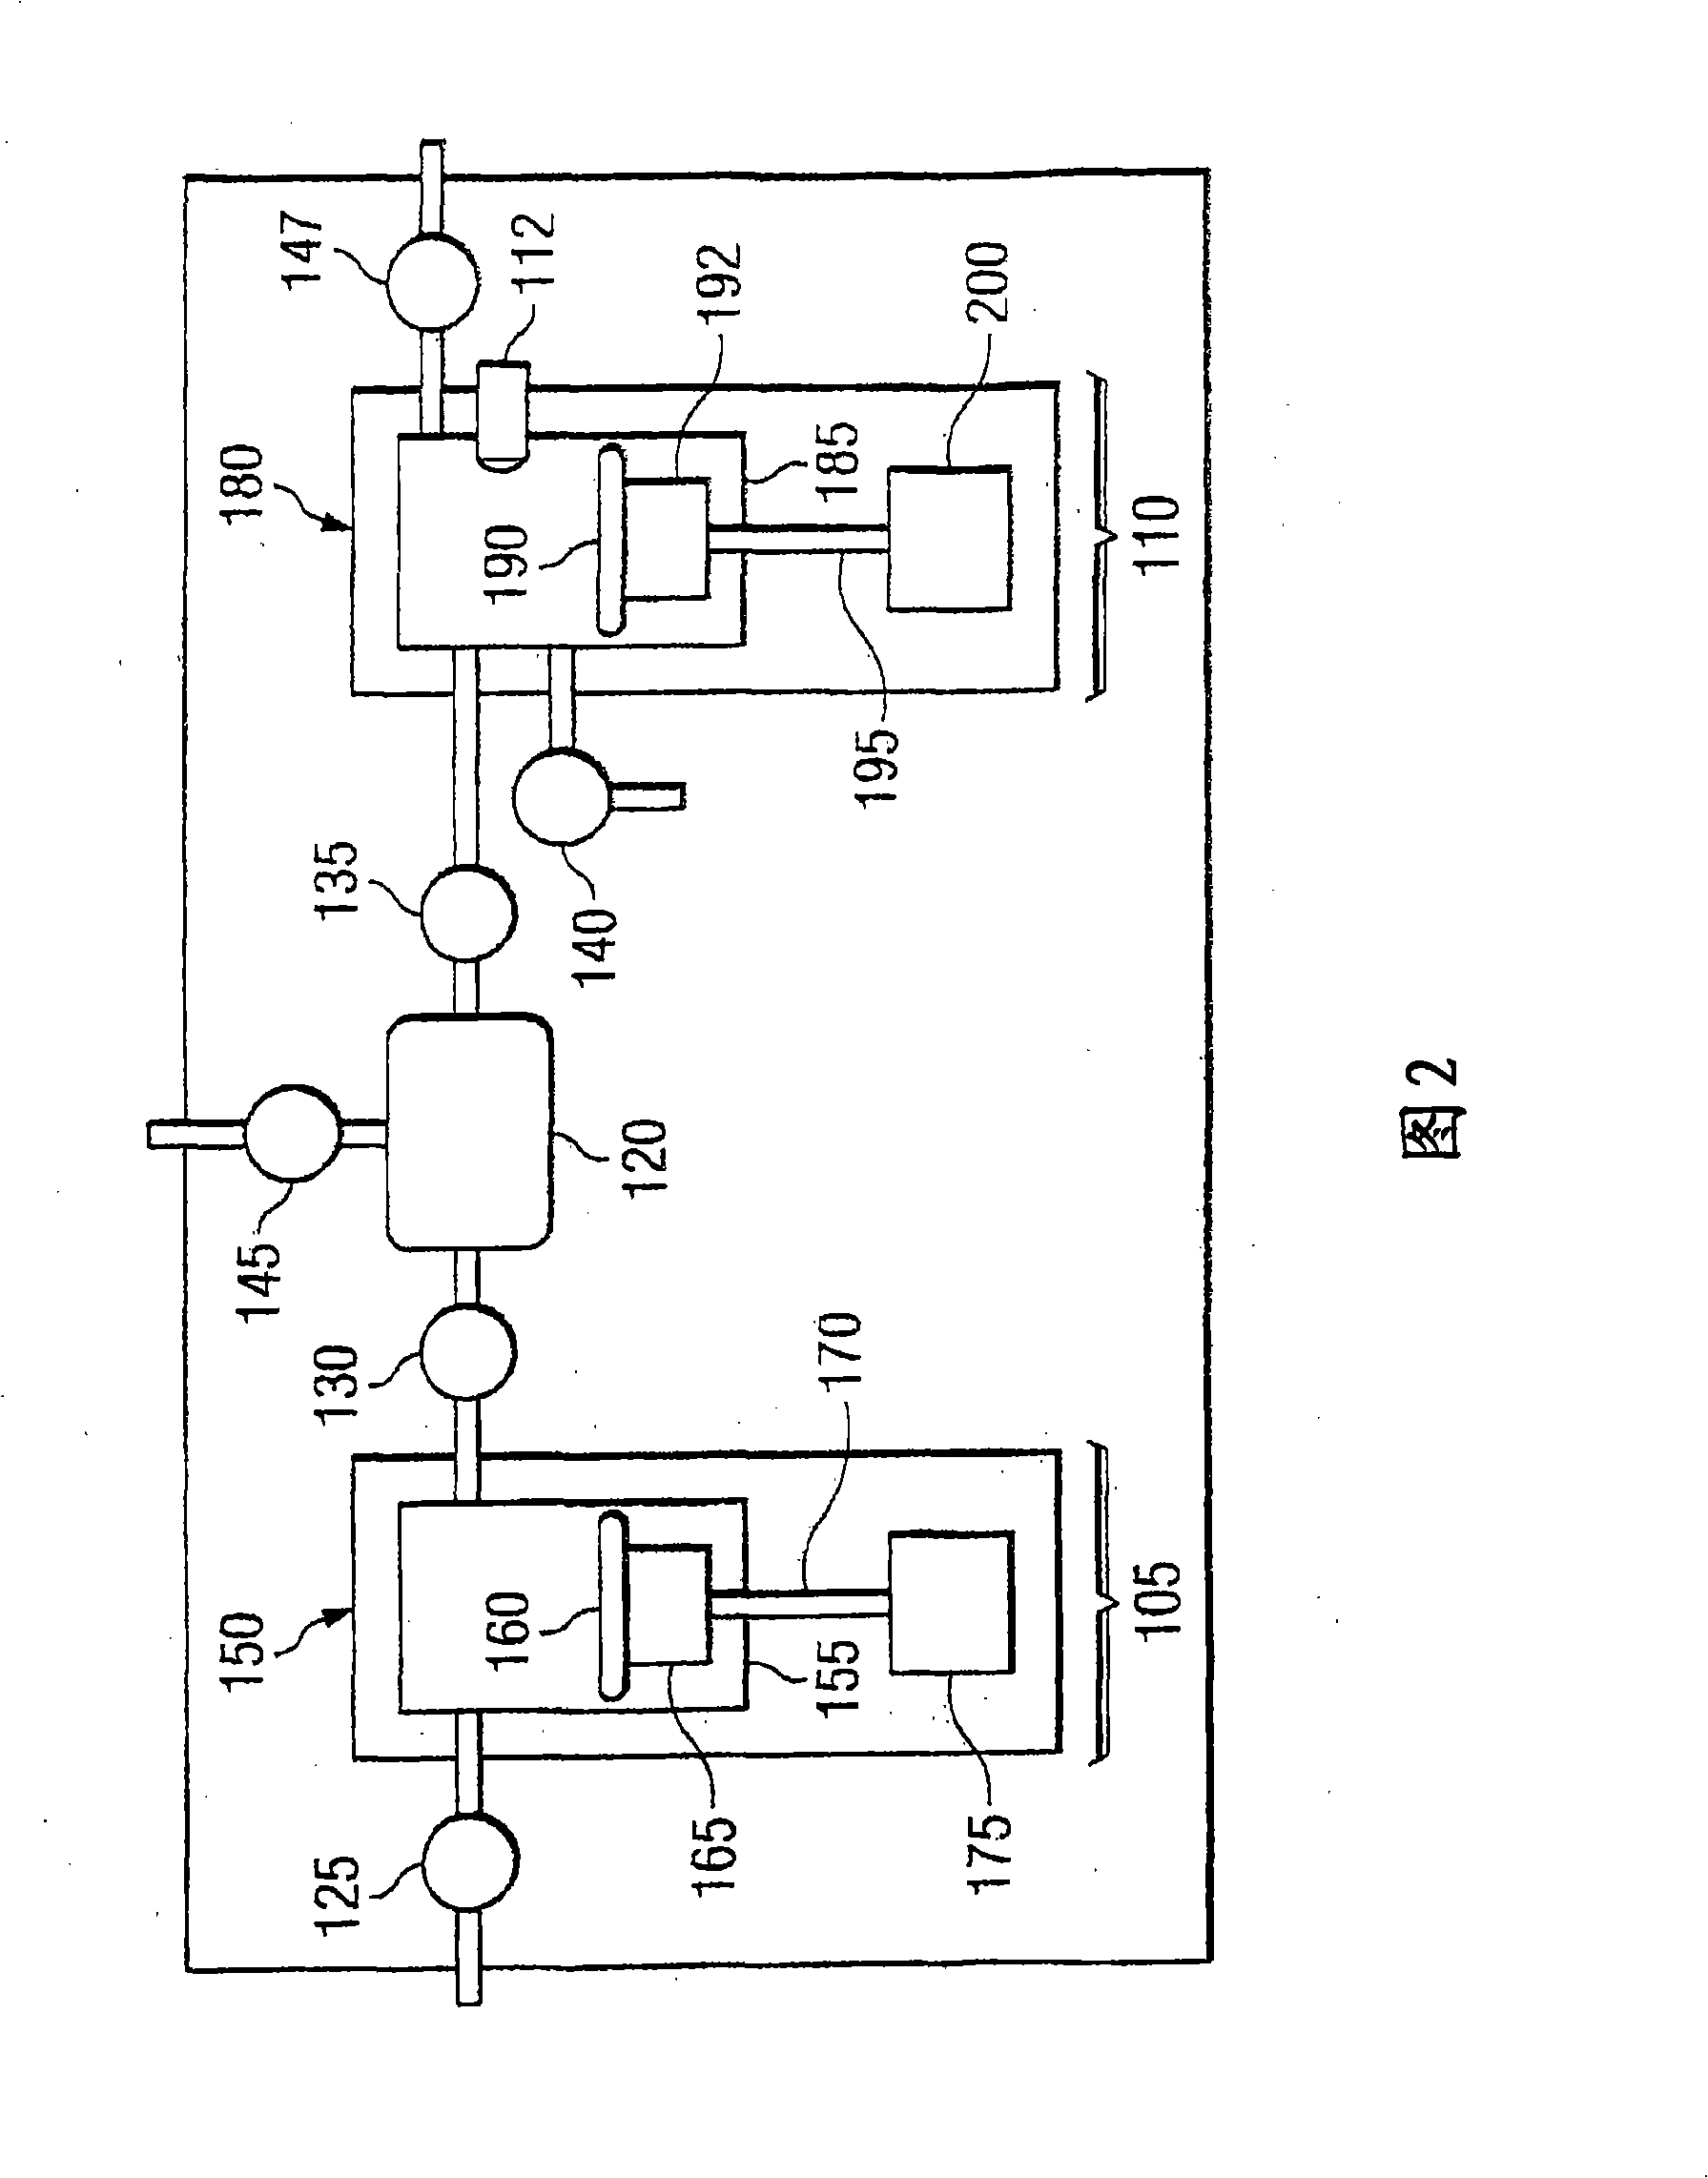 Systen and method for position control of a mechanical piston in a pump